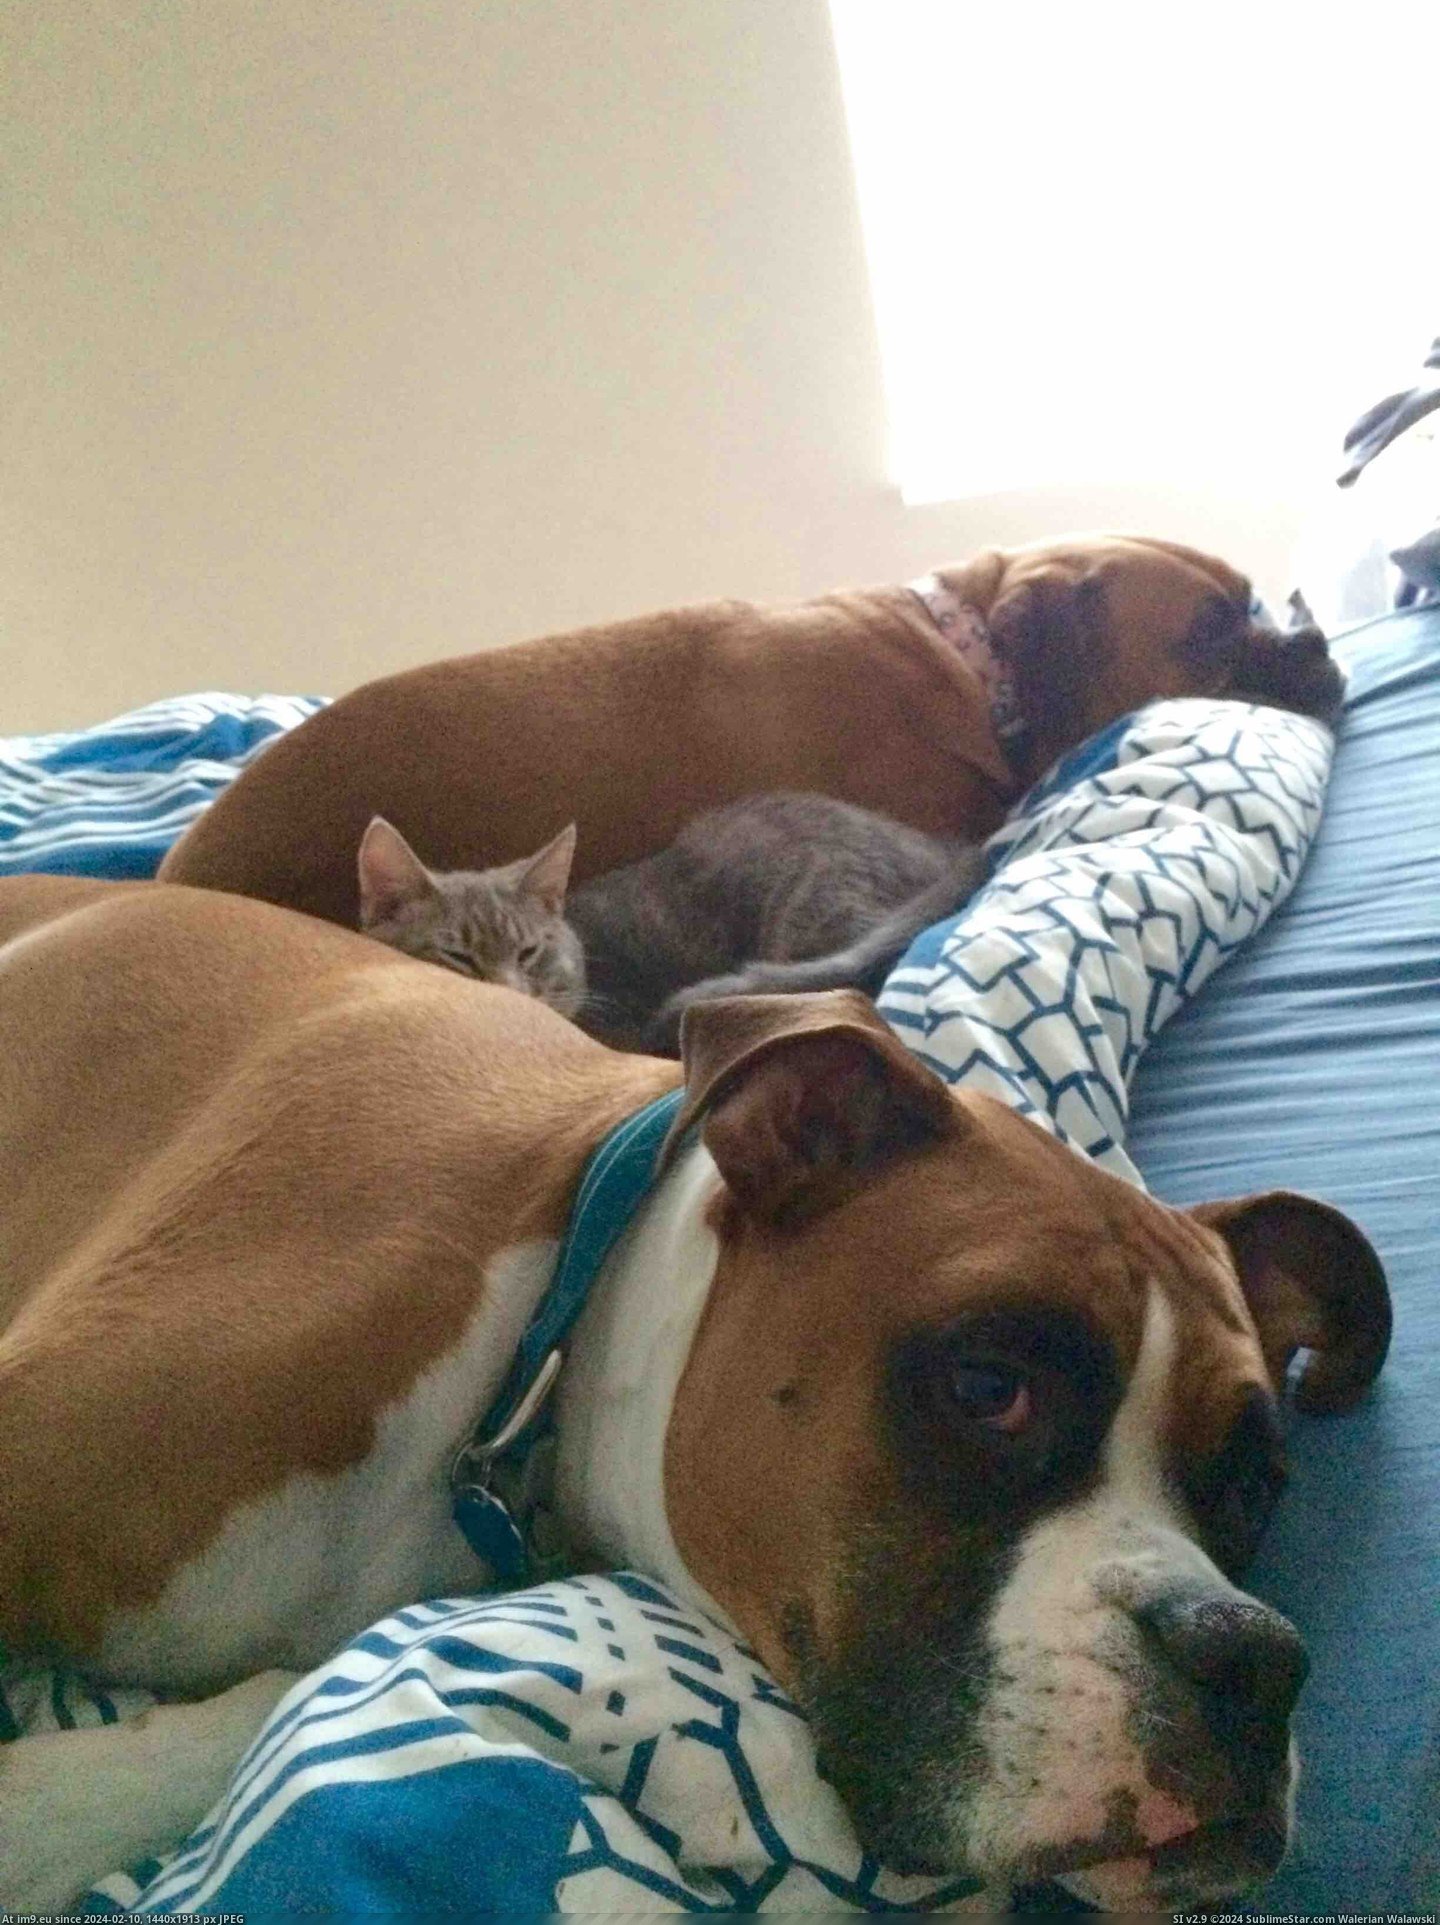 #Feel #Sick #Crew #Afternoon [Aww] Went home sick yesterday, this was my feel better crew all afternoon. Pic. (Obraz z album My r/AWW favs))